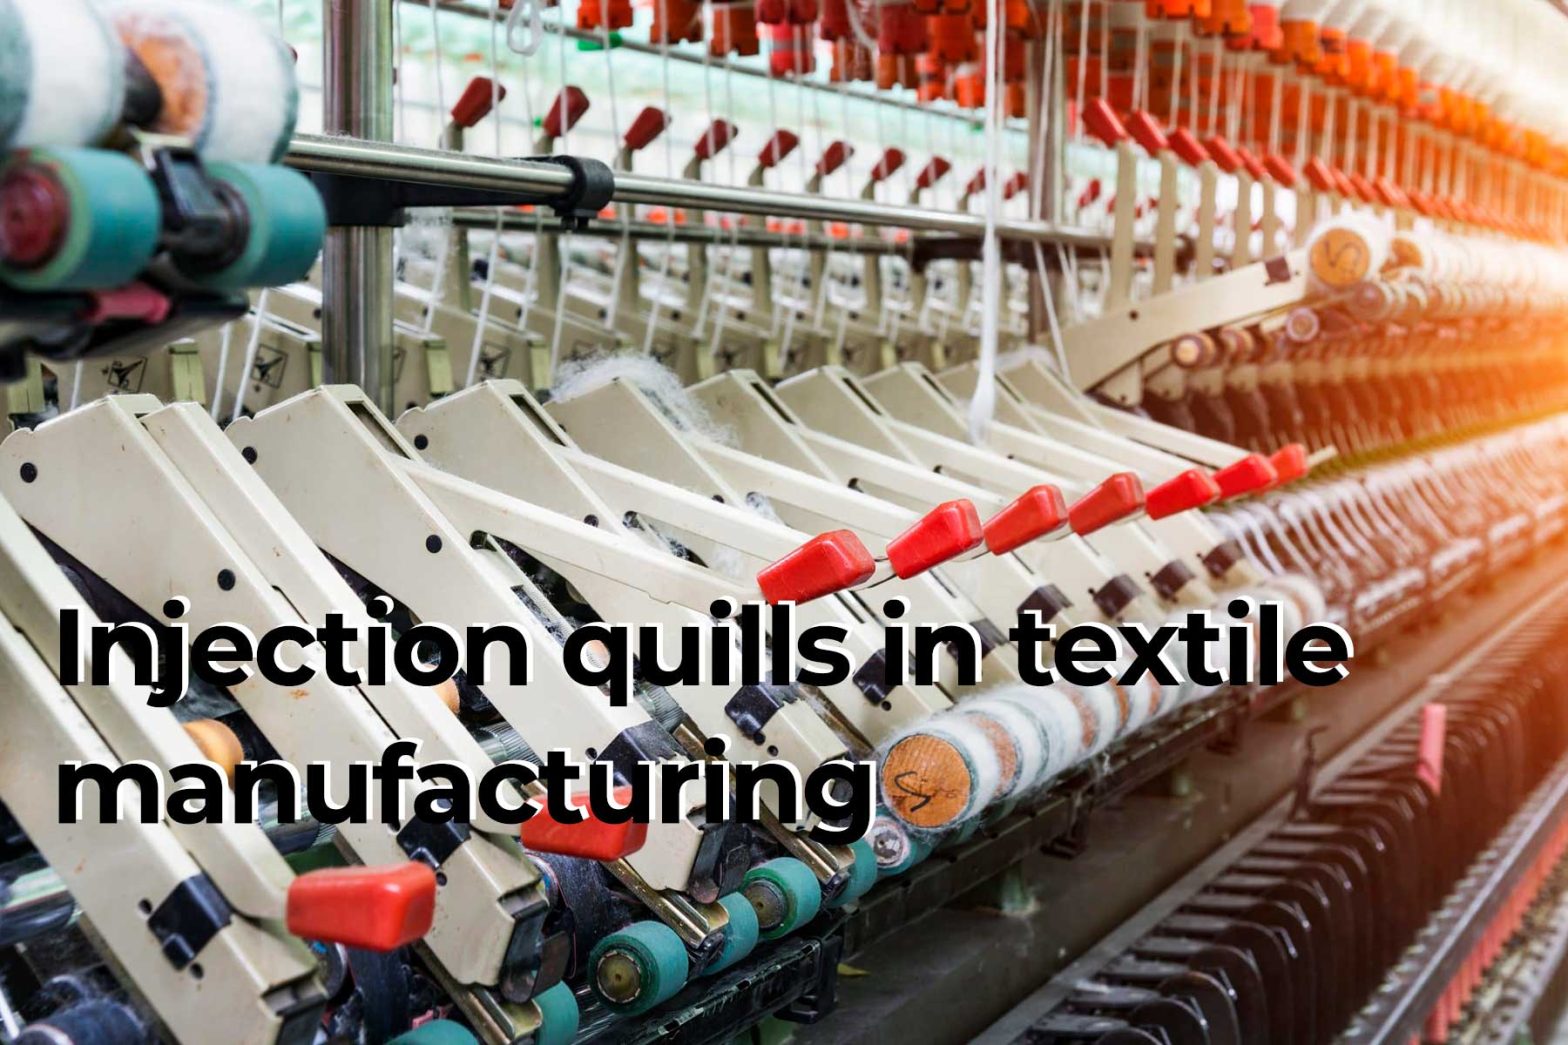 Injection quills in textile manufacturing